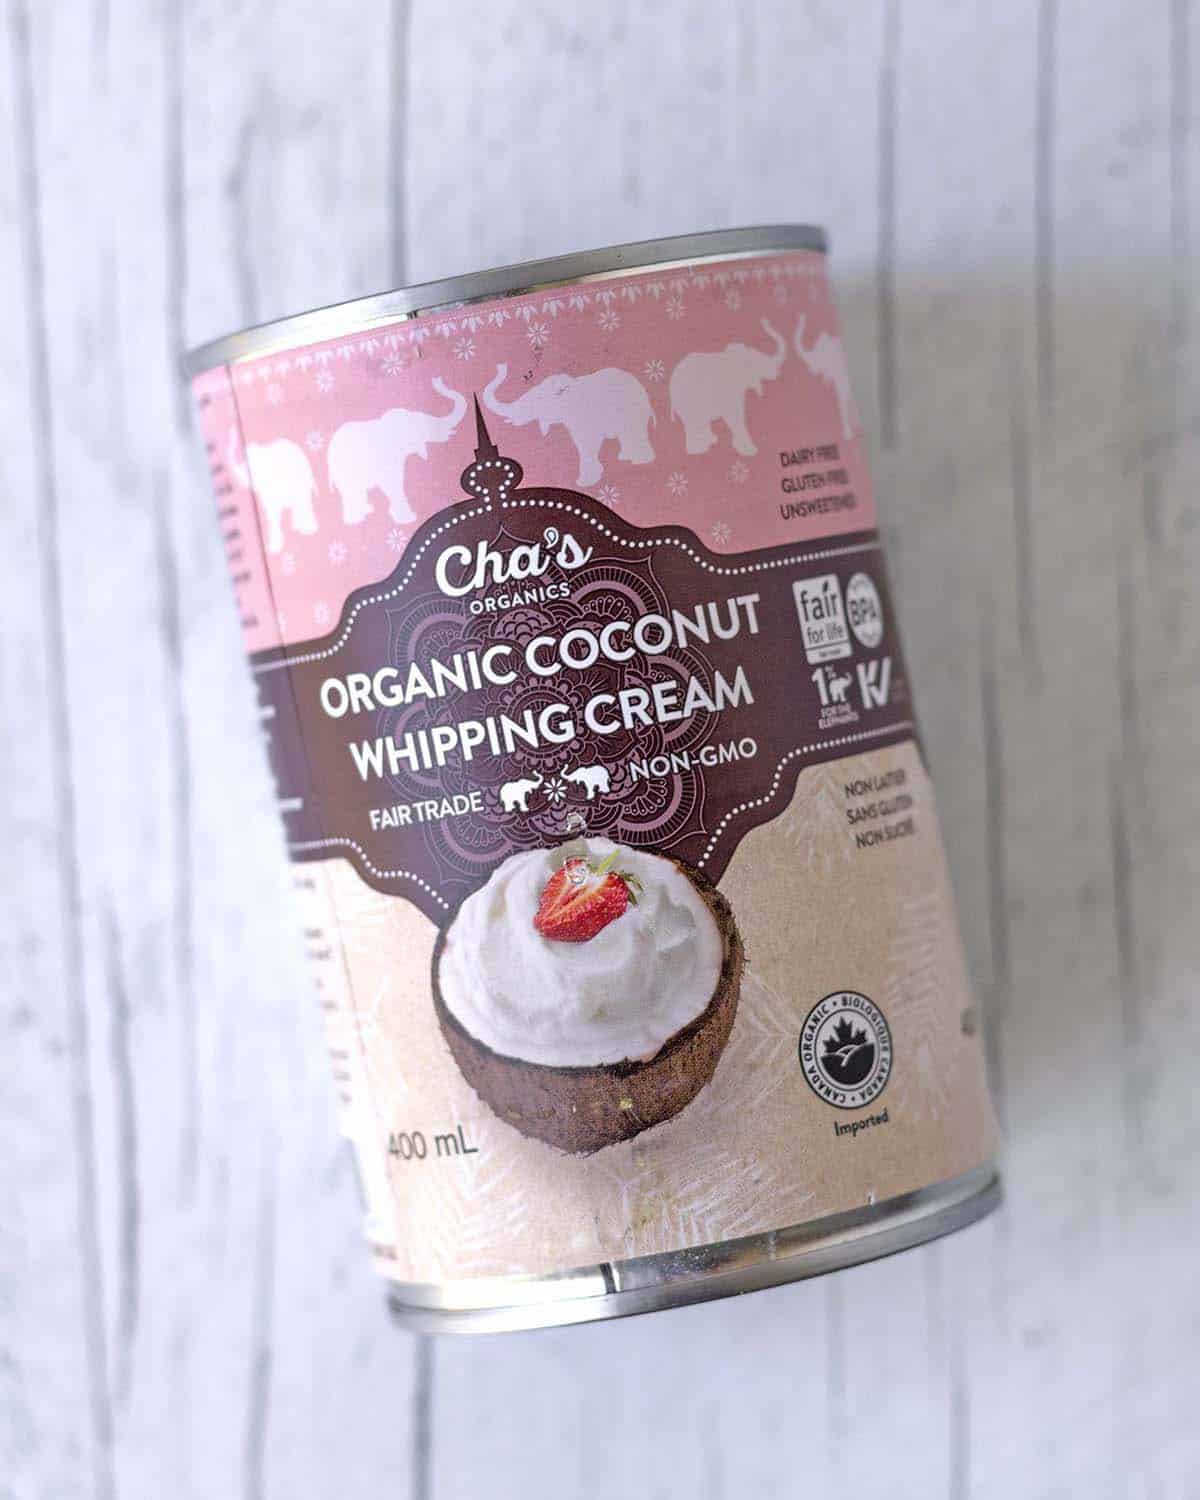 An overhead shot showing a can of Cha’s brand organic coconut whipping cream.